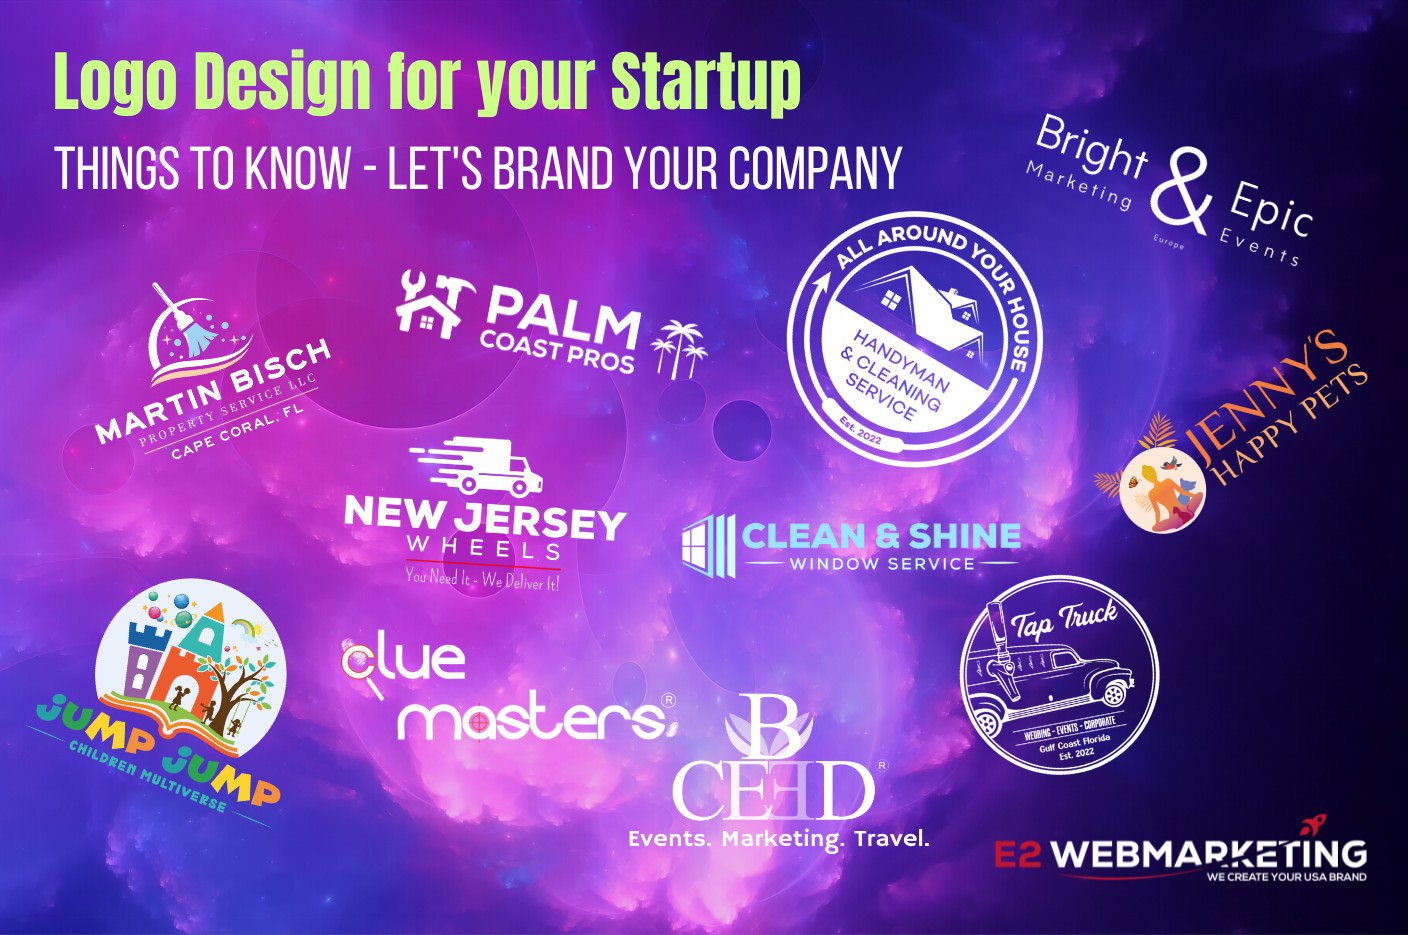 Logo Design for Startups - what should you keep in mind? Helpful tips for startup entrepreneurs from me as a marketing expert - e2webmarketing logo design services